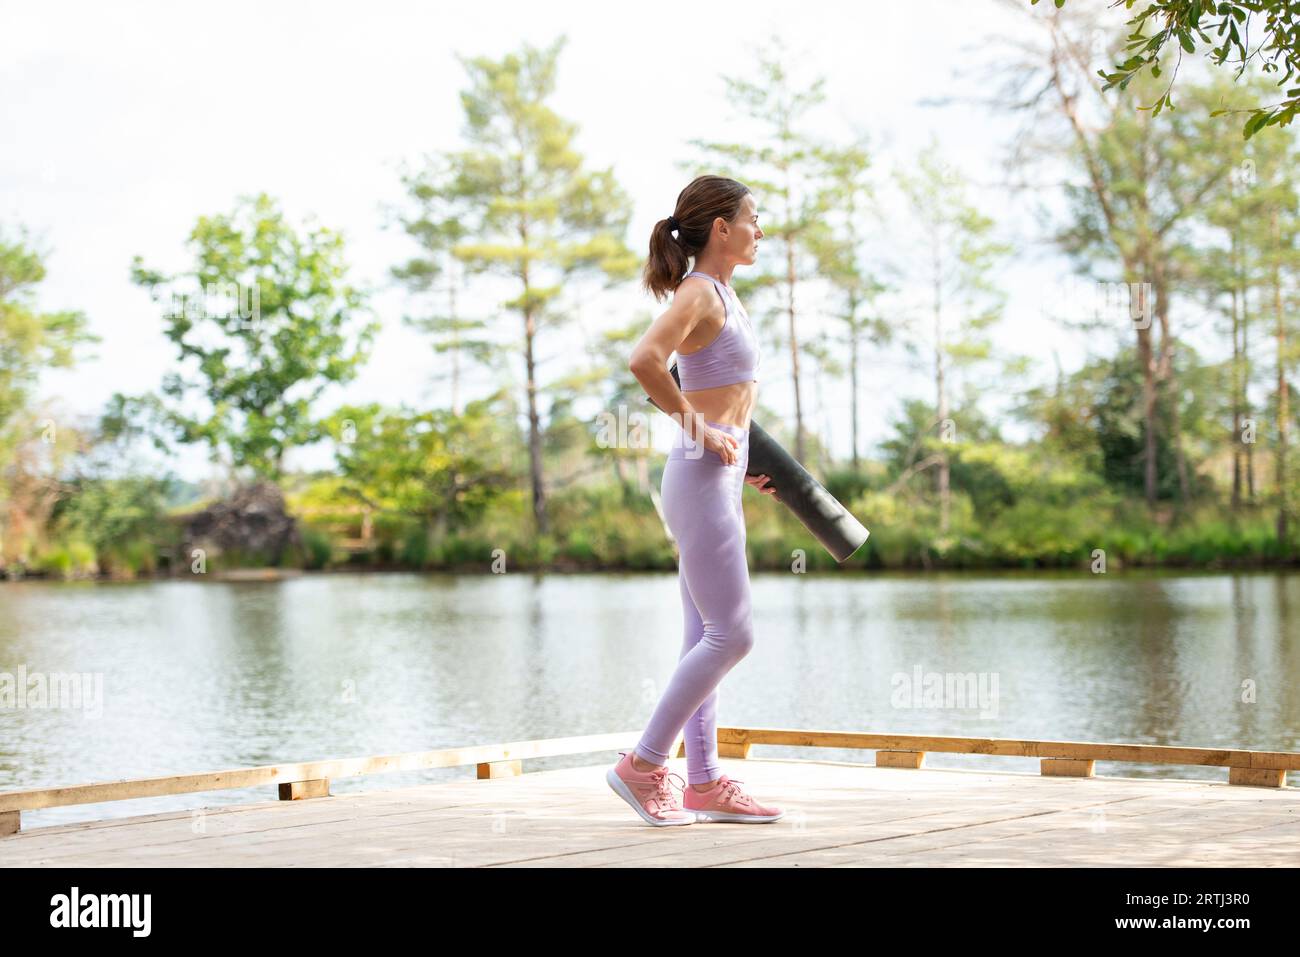 Sporty woman standing on a jetty by a lake holding an exercise mat, part of series. Stock Photo